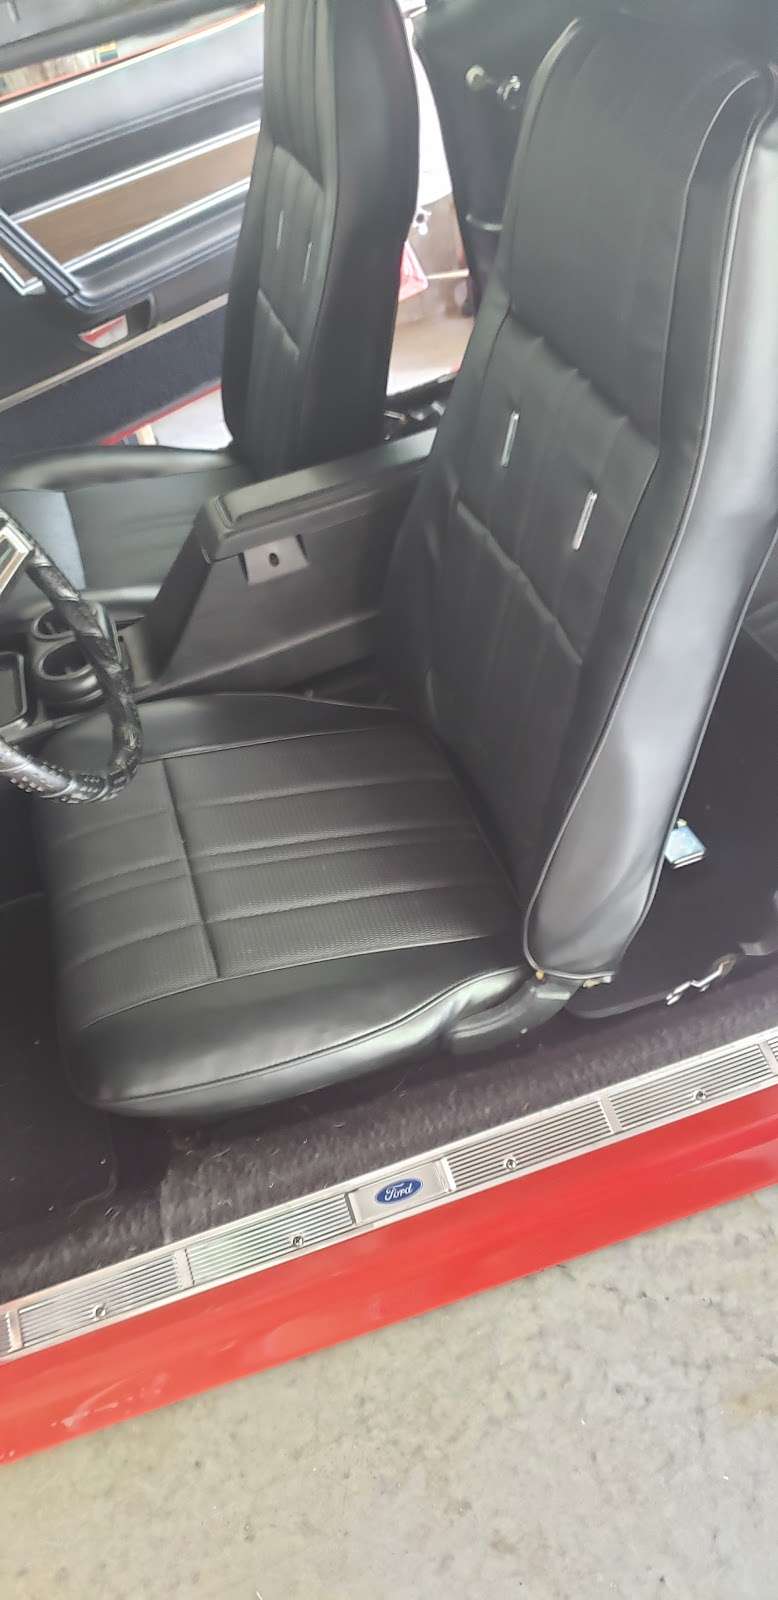 Durnils Auto Upholstery | 5083 N Union Valley Rd, Bloomington, IN 47404, USA | Phone: (812) 322-1135